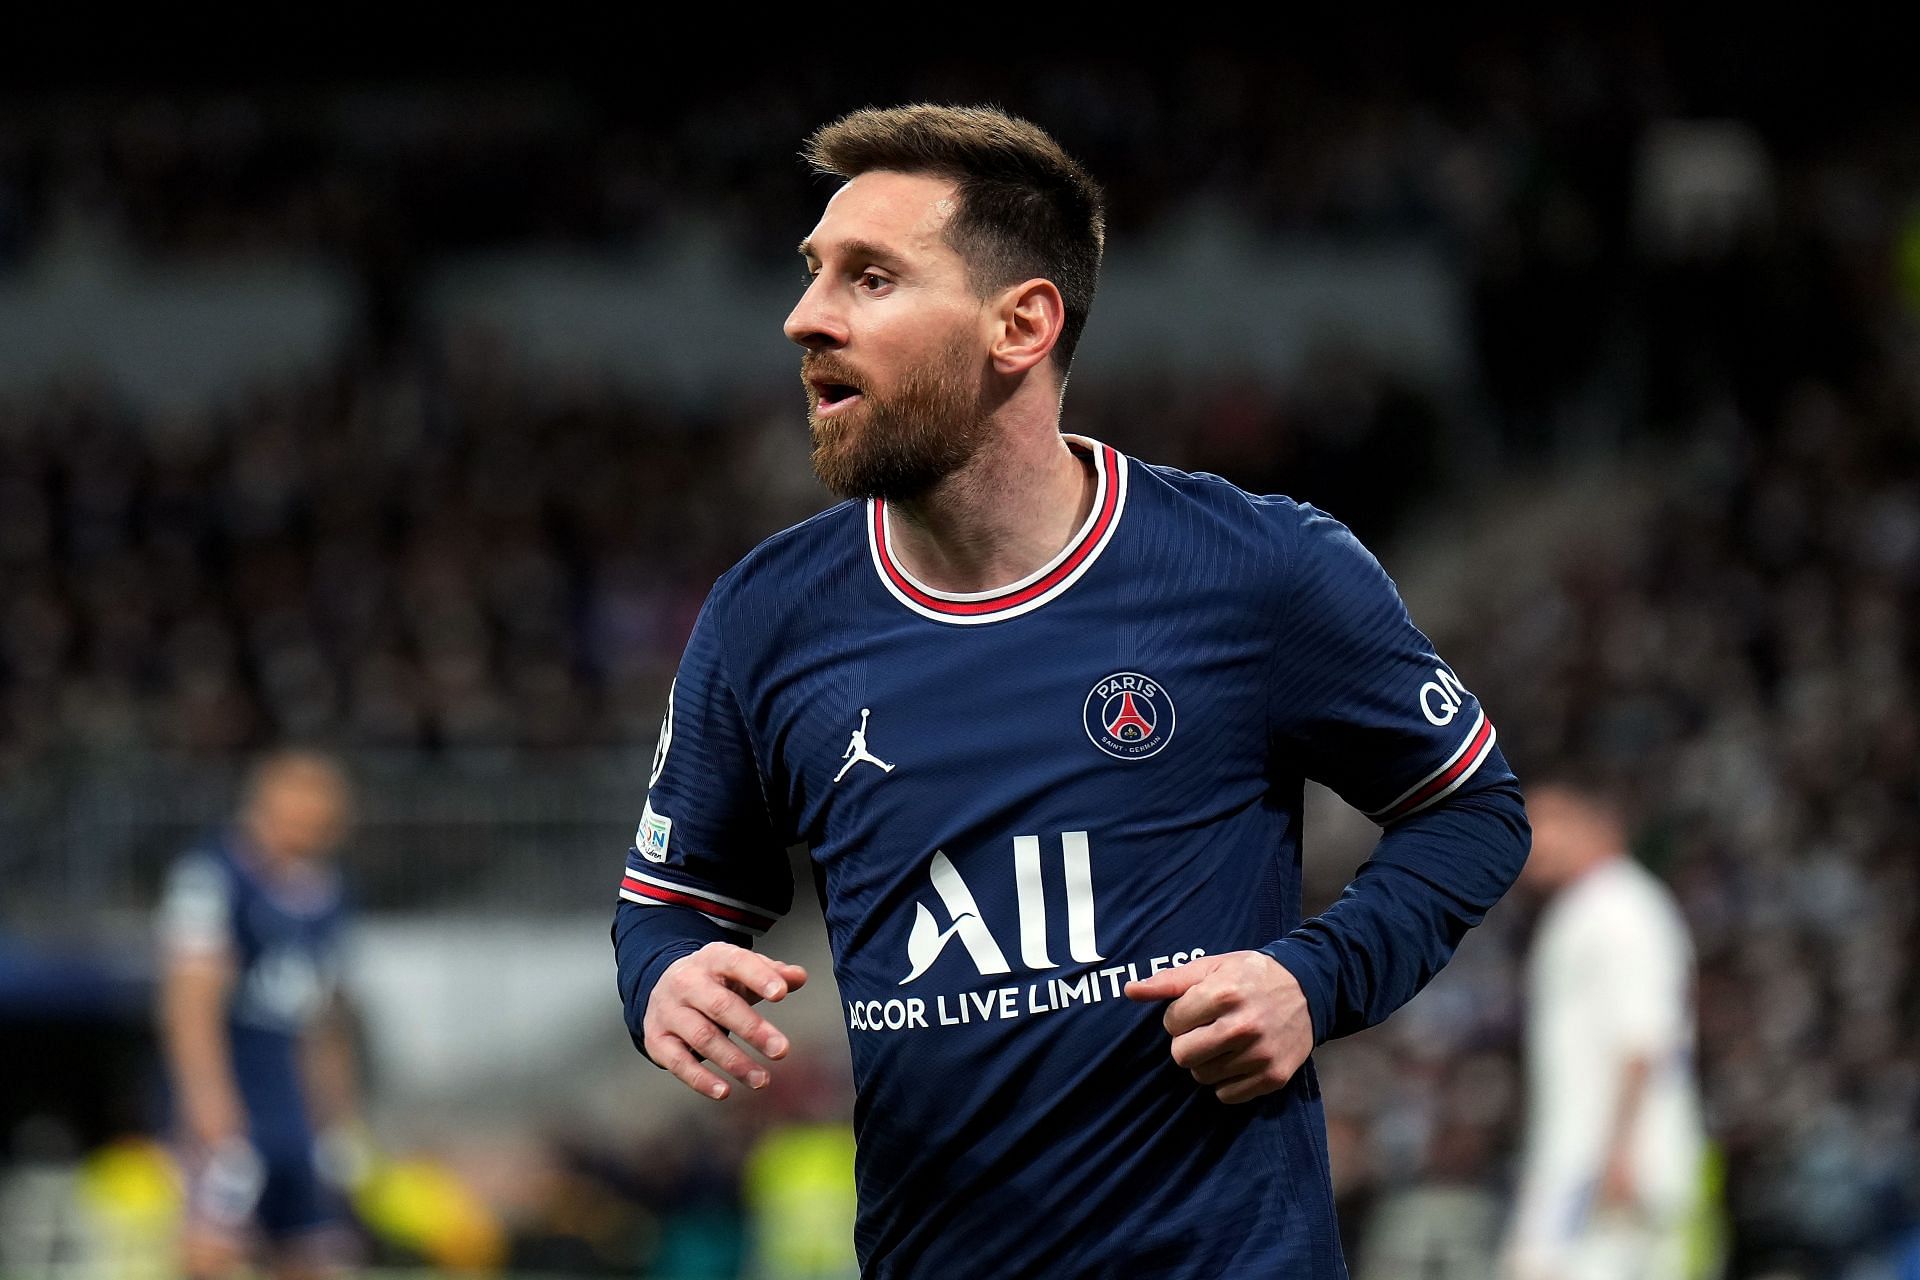 Lionel Messi has hit the woodwork 10 times for PSG this season